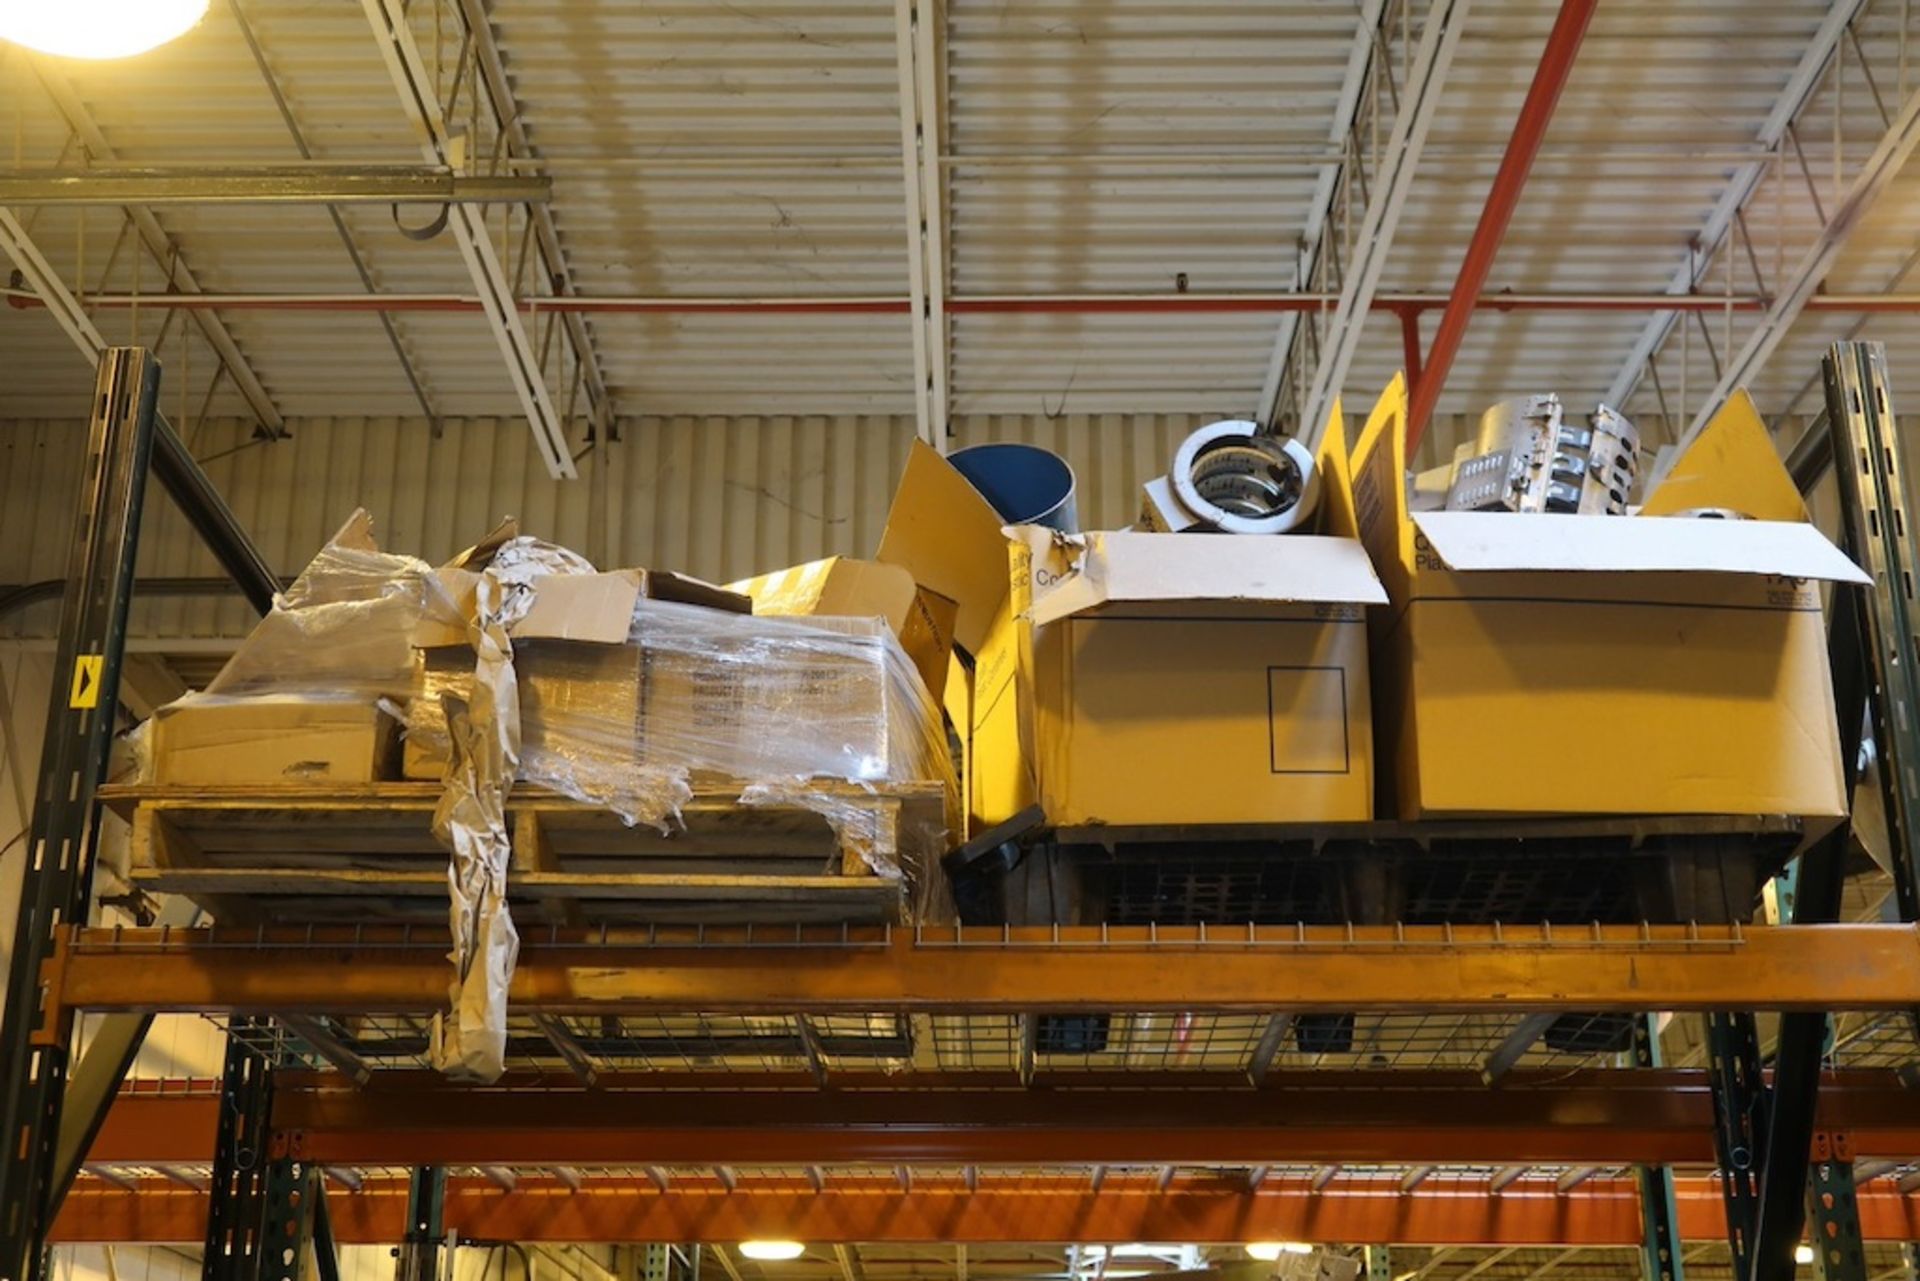 Contents of (1) Sections of Pallet Racking, Including Misc. Machine Parts, Etc. - Image 2 of 5